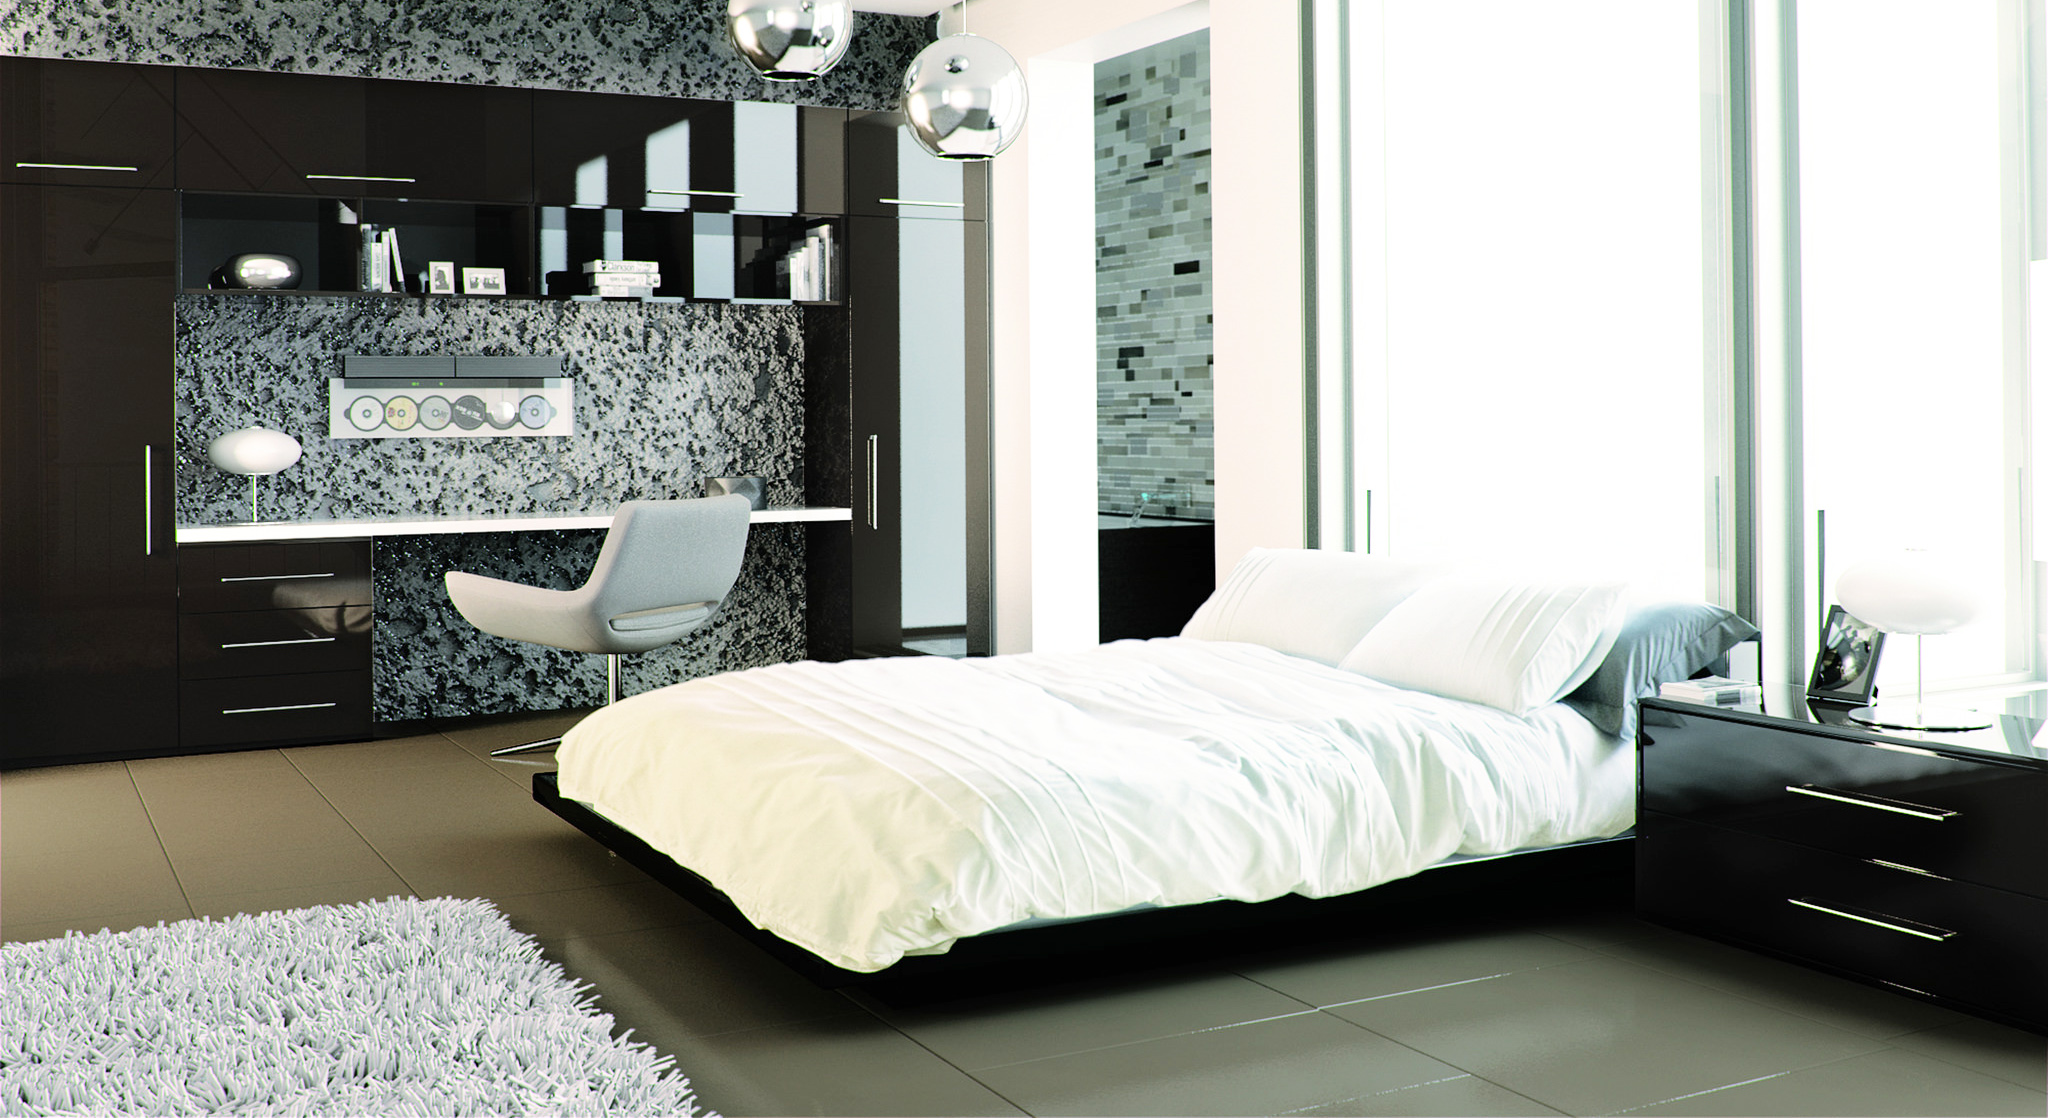 Bedroom inspiration to transform your old bedroom into new stylish one with luxury bedroom furniture and contemporary bedroom sets